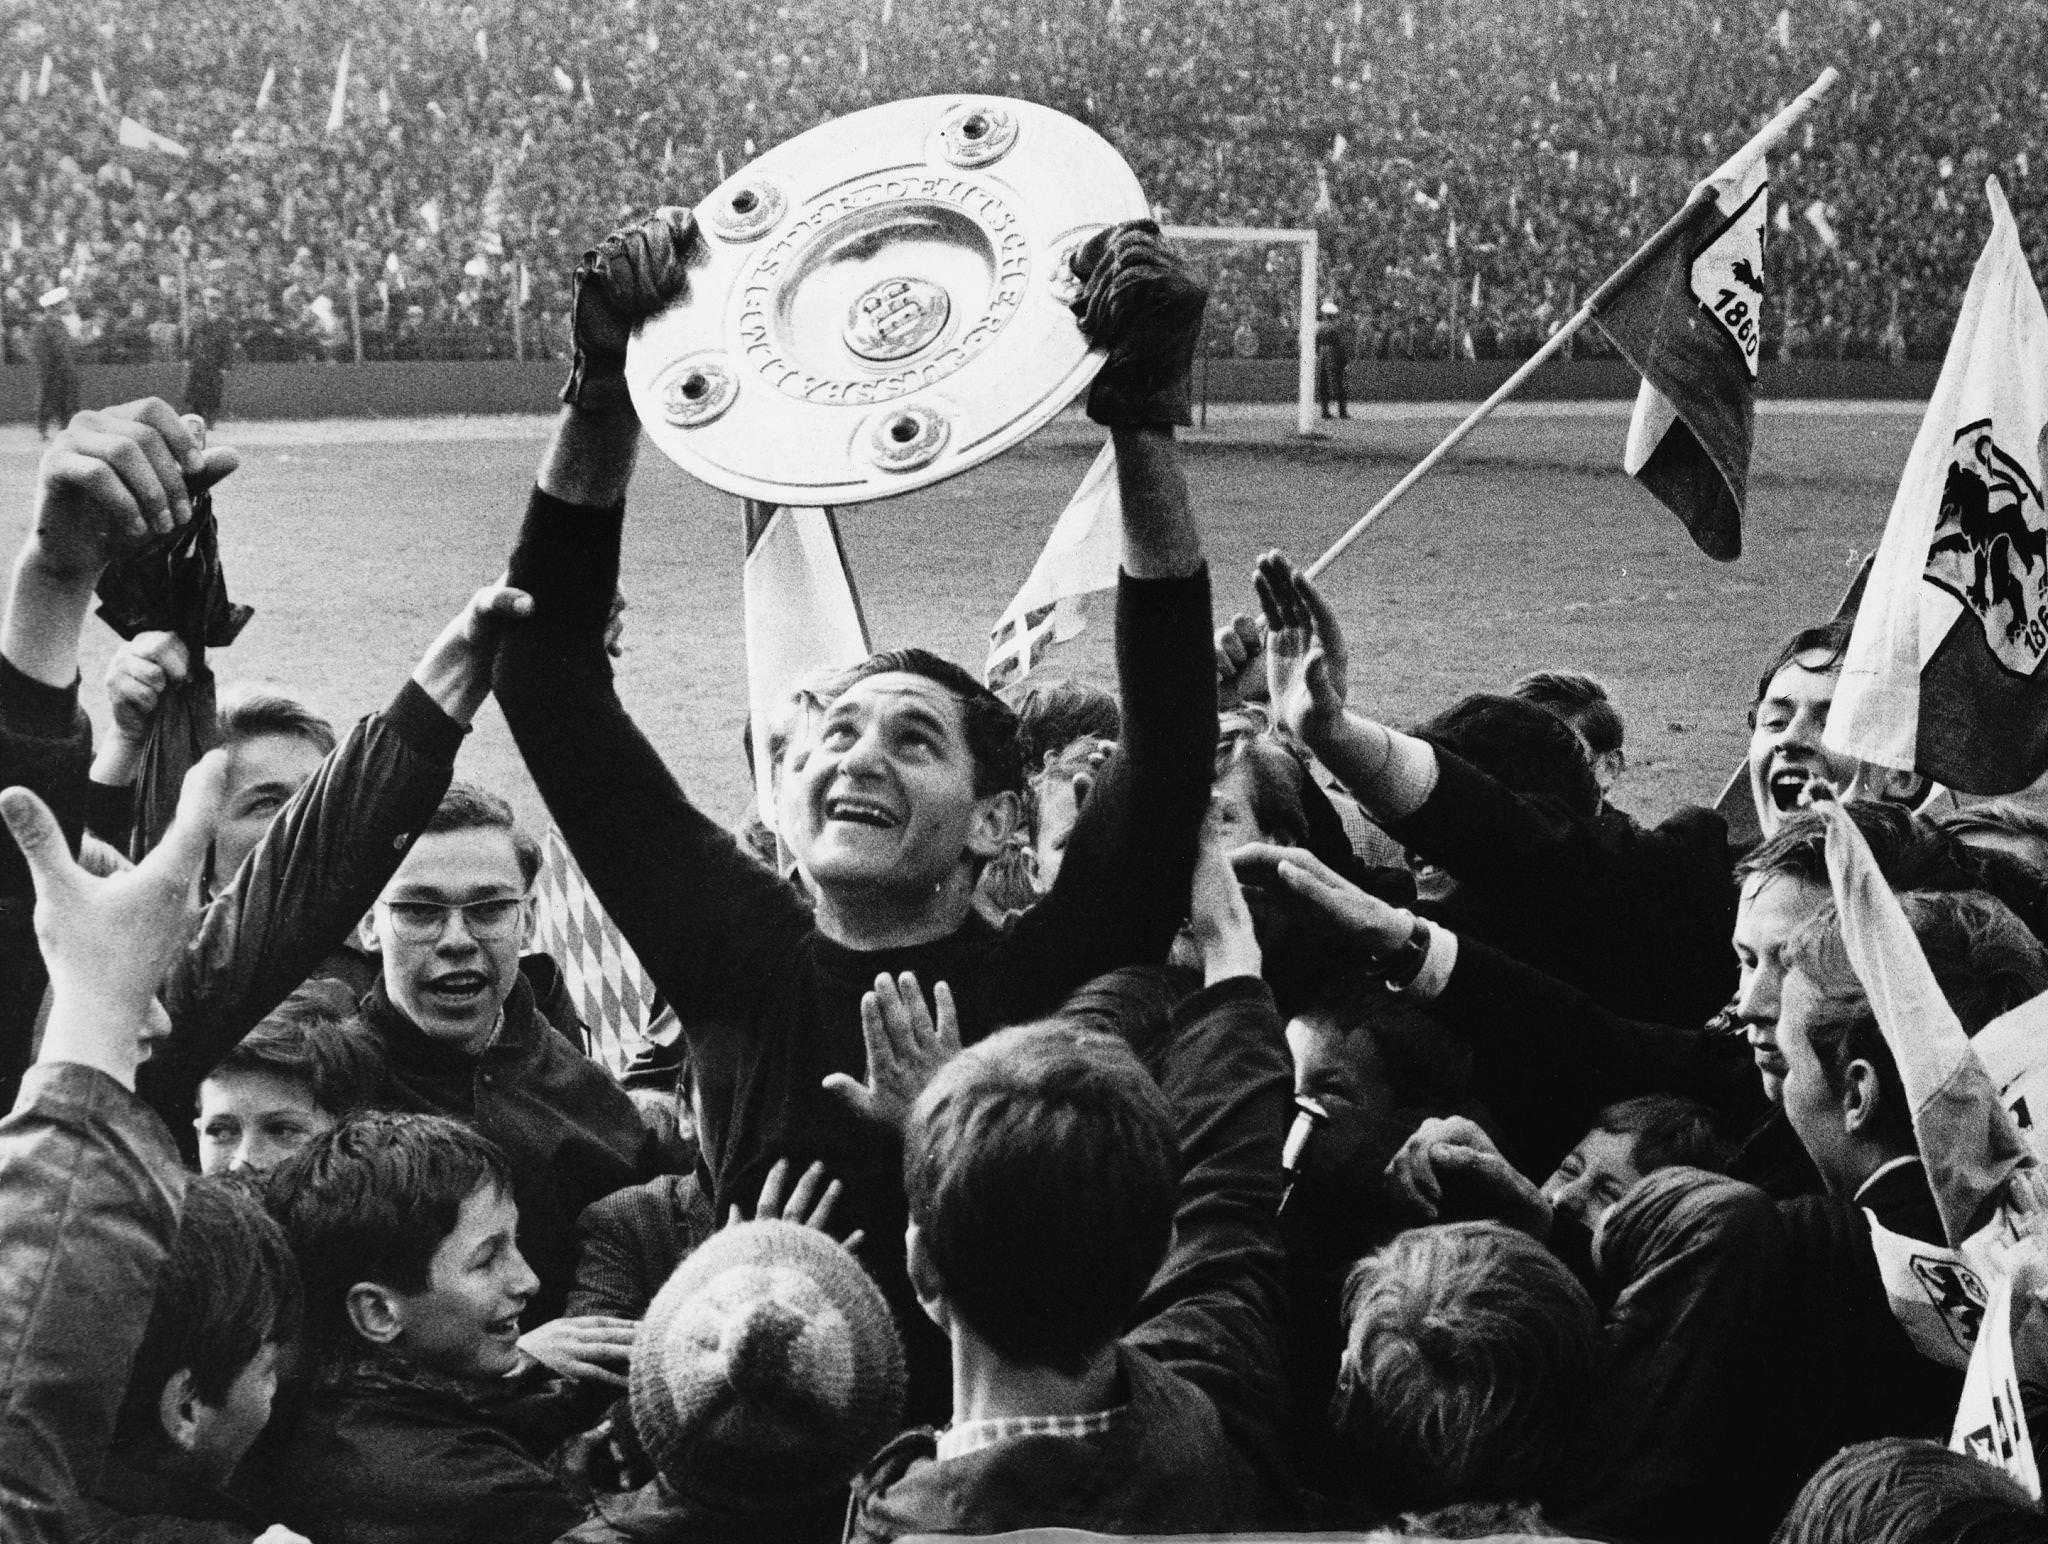 Petar Radenkovic, goalkeeper for TSV 1860 Munich, celebrates with fans holding up the winner's cup after a 1-1 draw against HSV to become German football champion, 1966